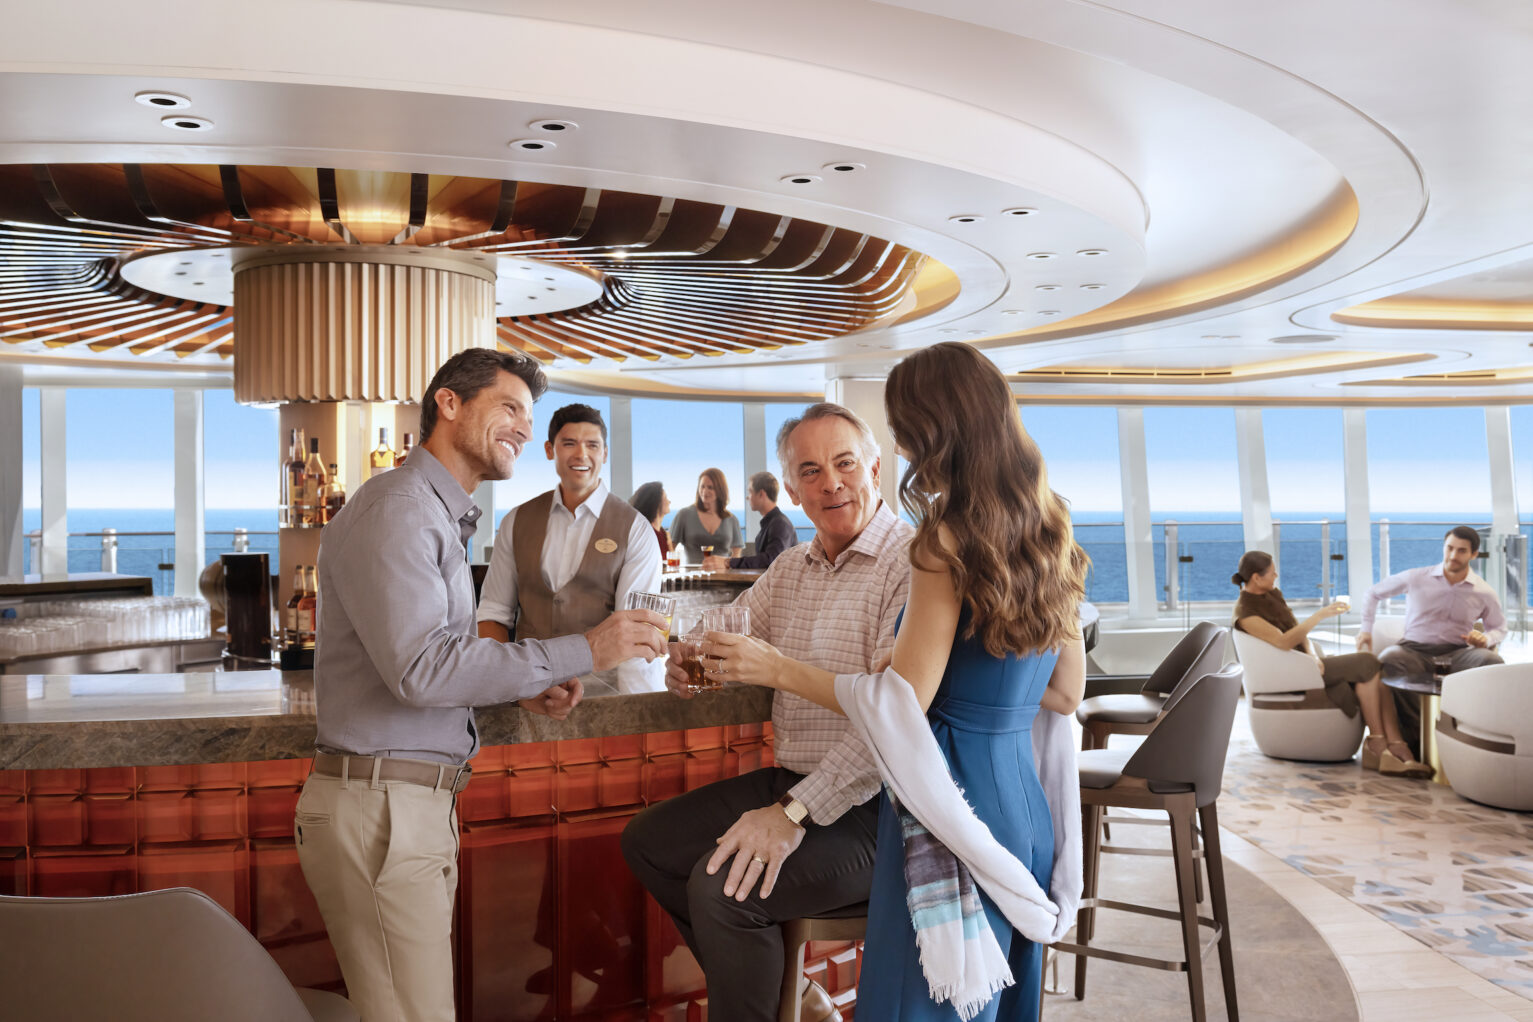 The Whiskey Bar on Norwegian Cruise Line Prima class shows a barman serving drinks to guests.